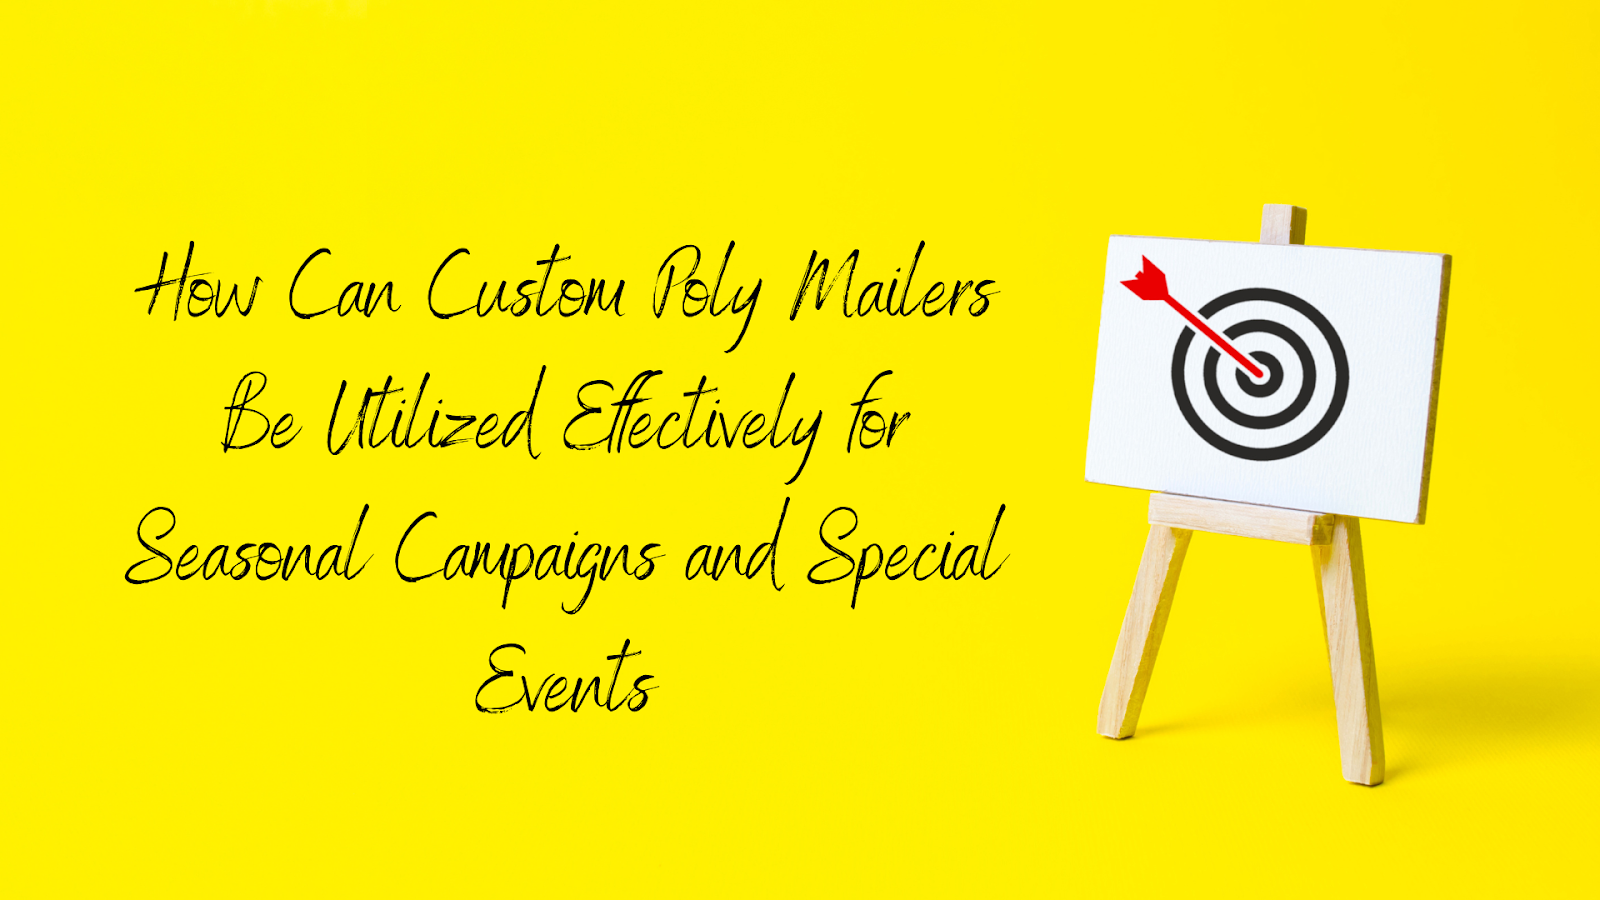 How Can Custom Poly Mailers Be Utilized Effectively for Seasonal Campaigns and Special Events?